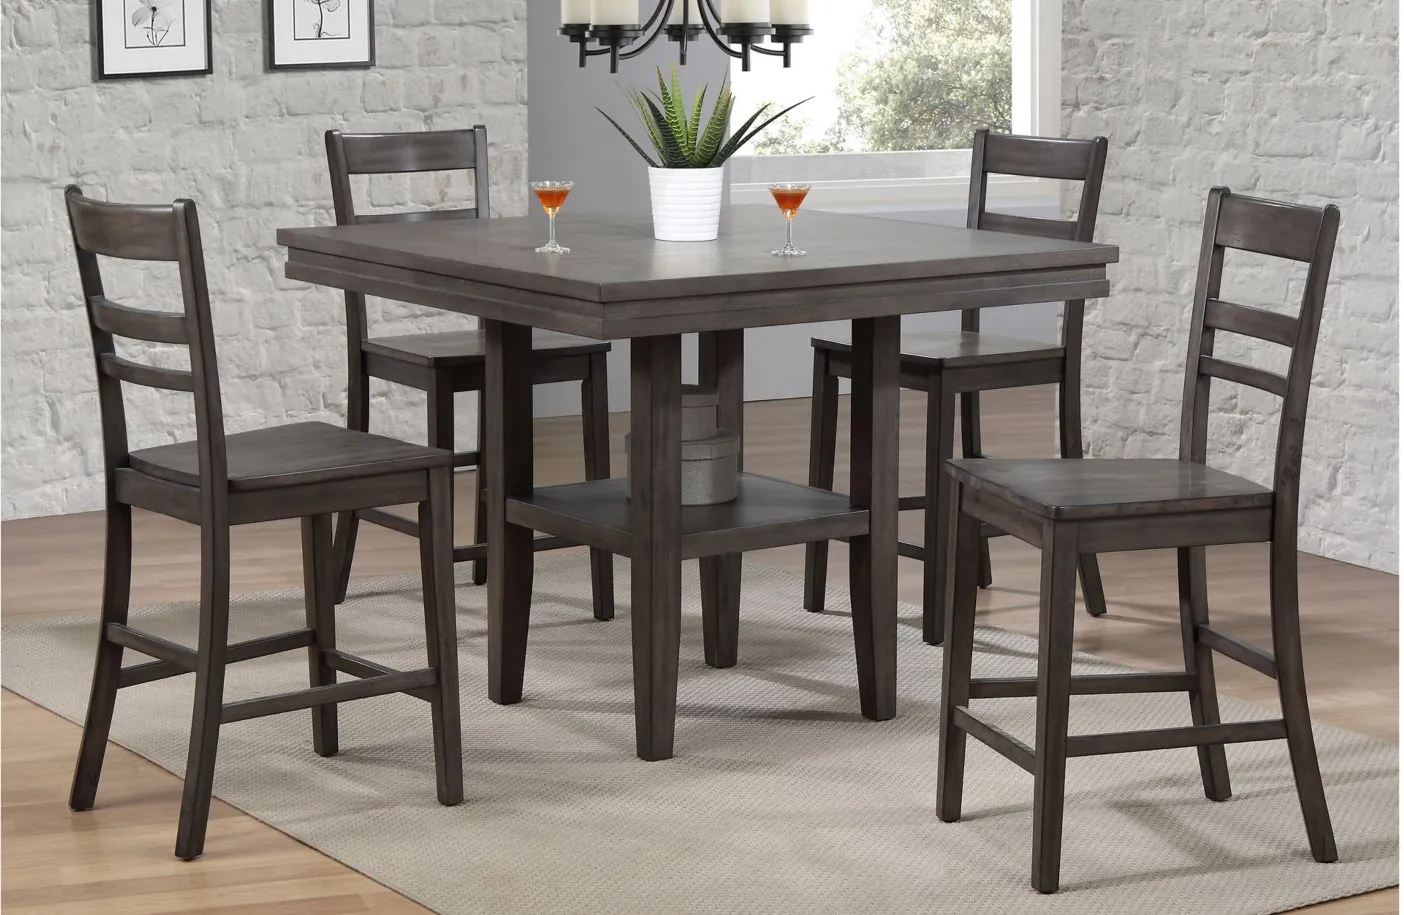 Eastlane 5-pc. Counter Height Dining Set in Weathered Gray by Sunset Trading